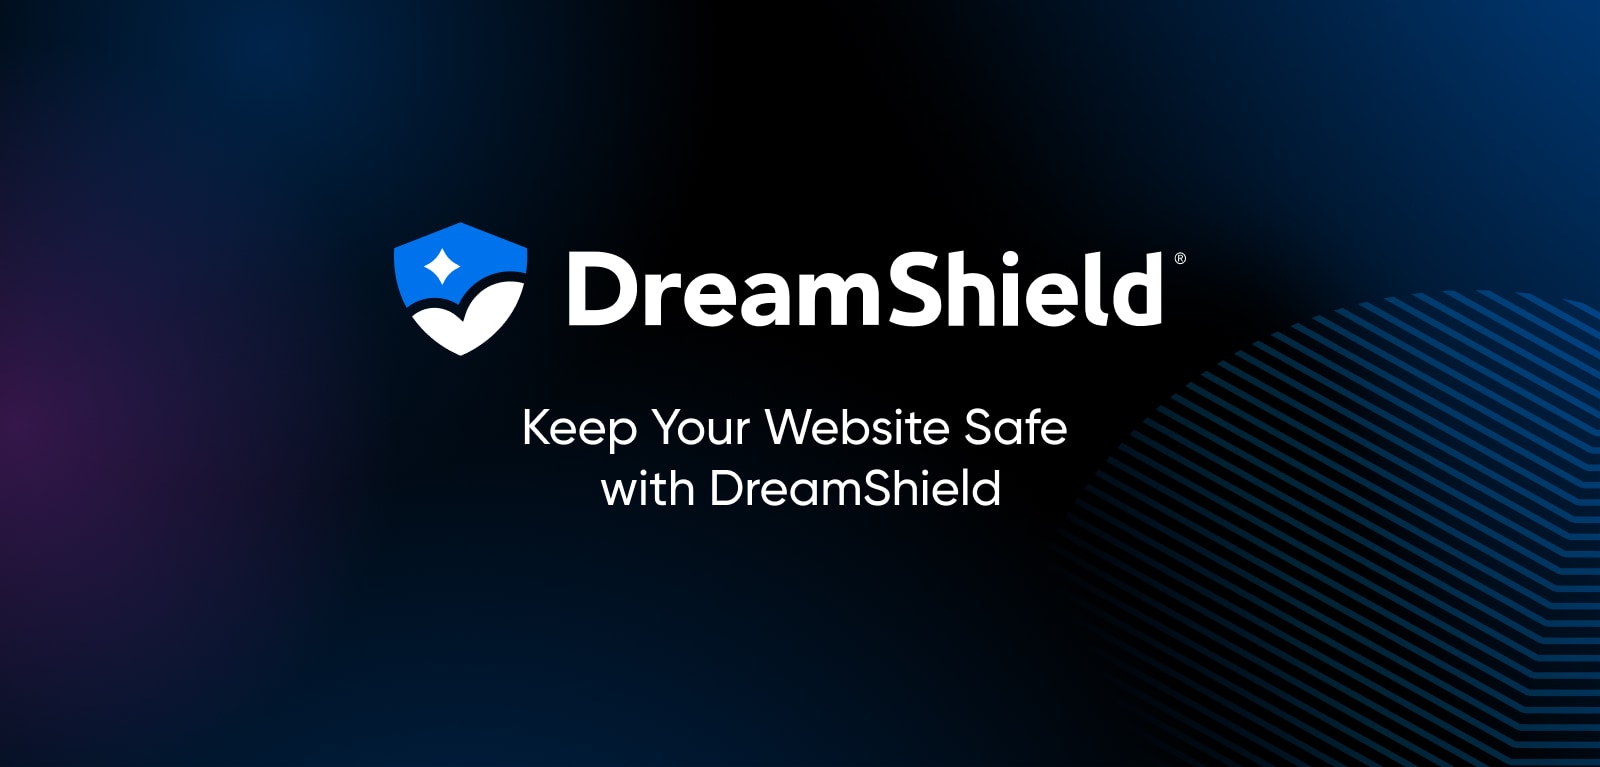 Against a dark blue and black background, the words 'DreamShield: Keep Your Website Safe with DreamShield' appear in white font